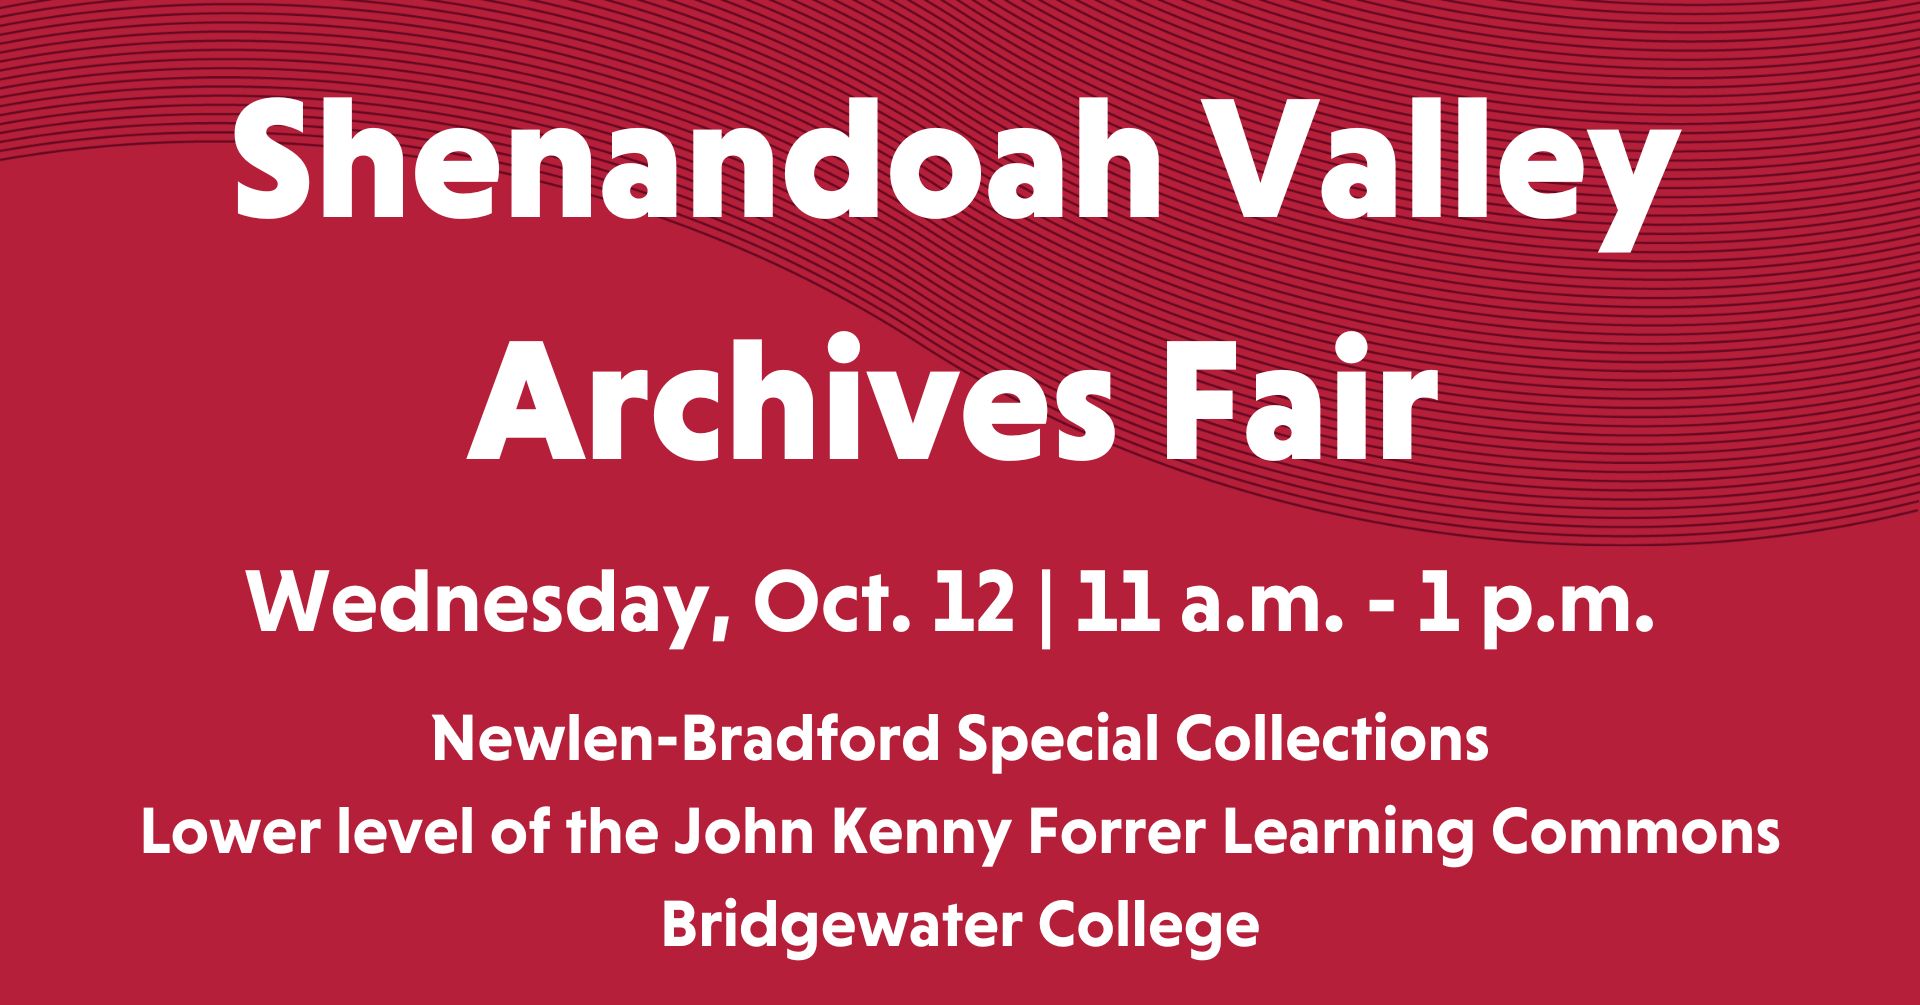 Bridgewater College to Host Annual Shenandoah Valley Archives Fair